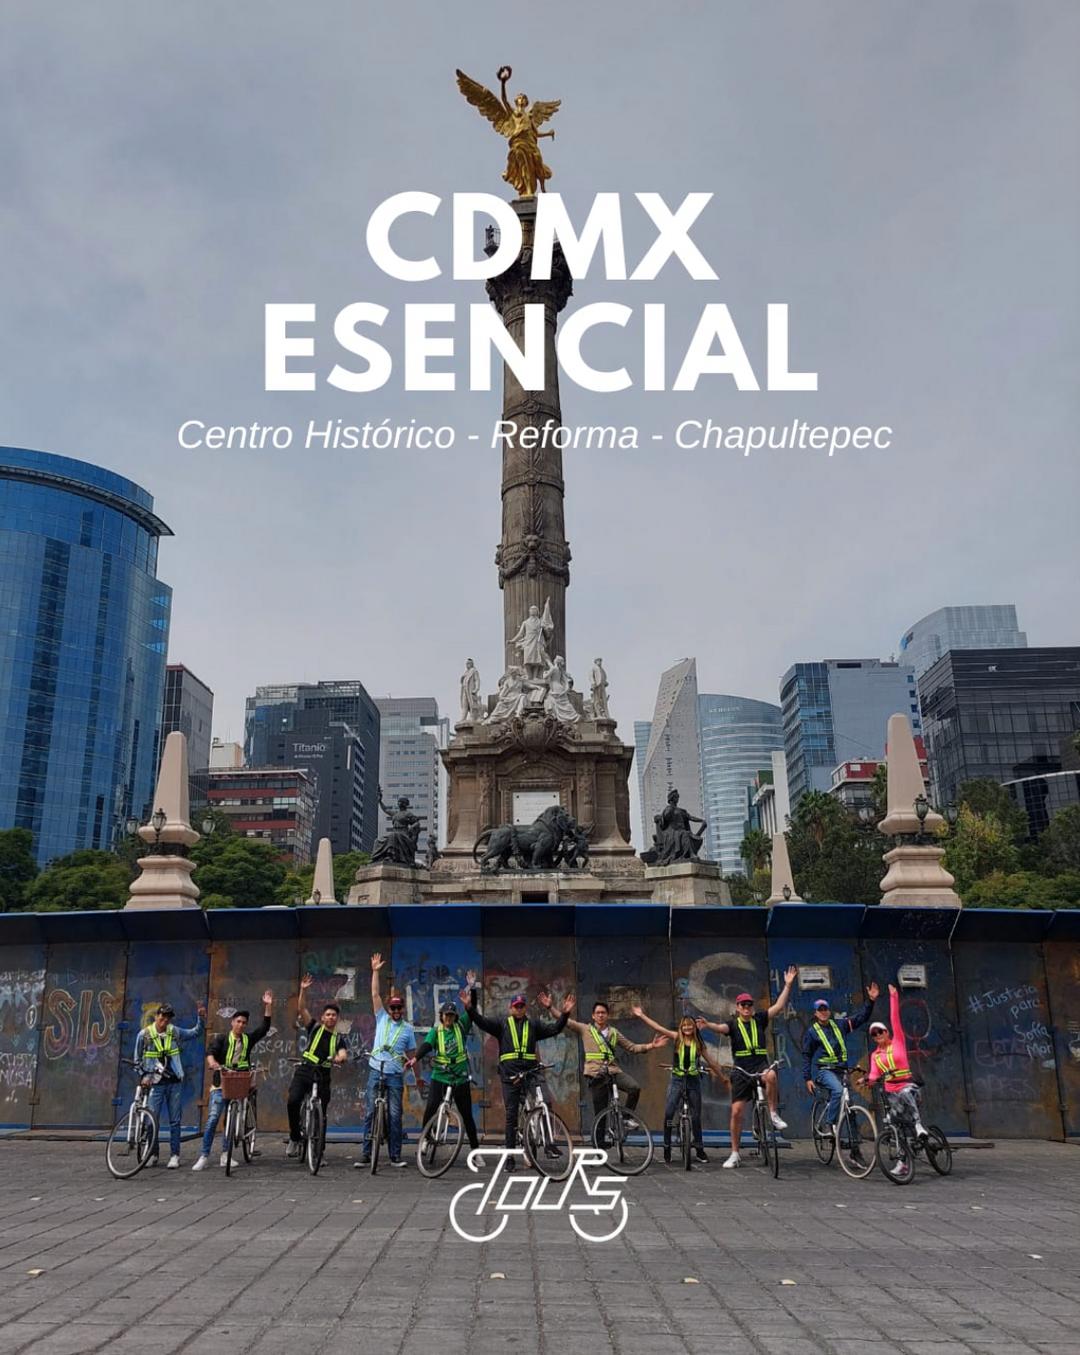 Image of Essential Bike Tour of Downtown Mexico City